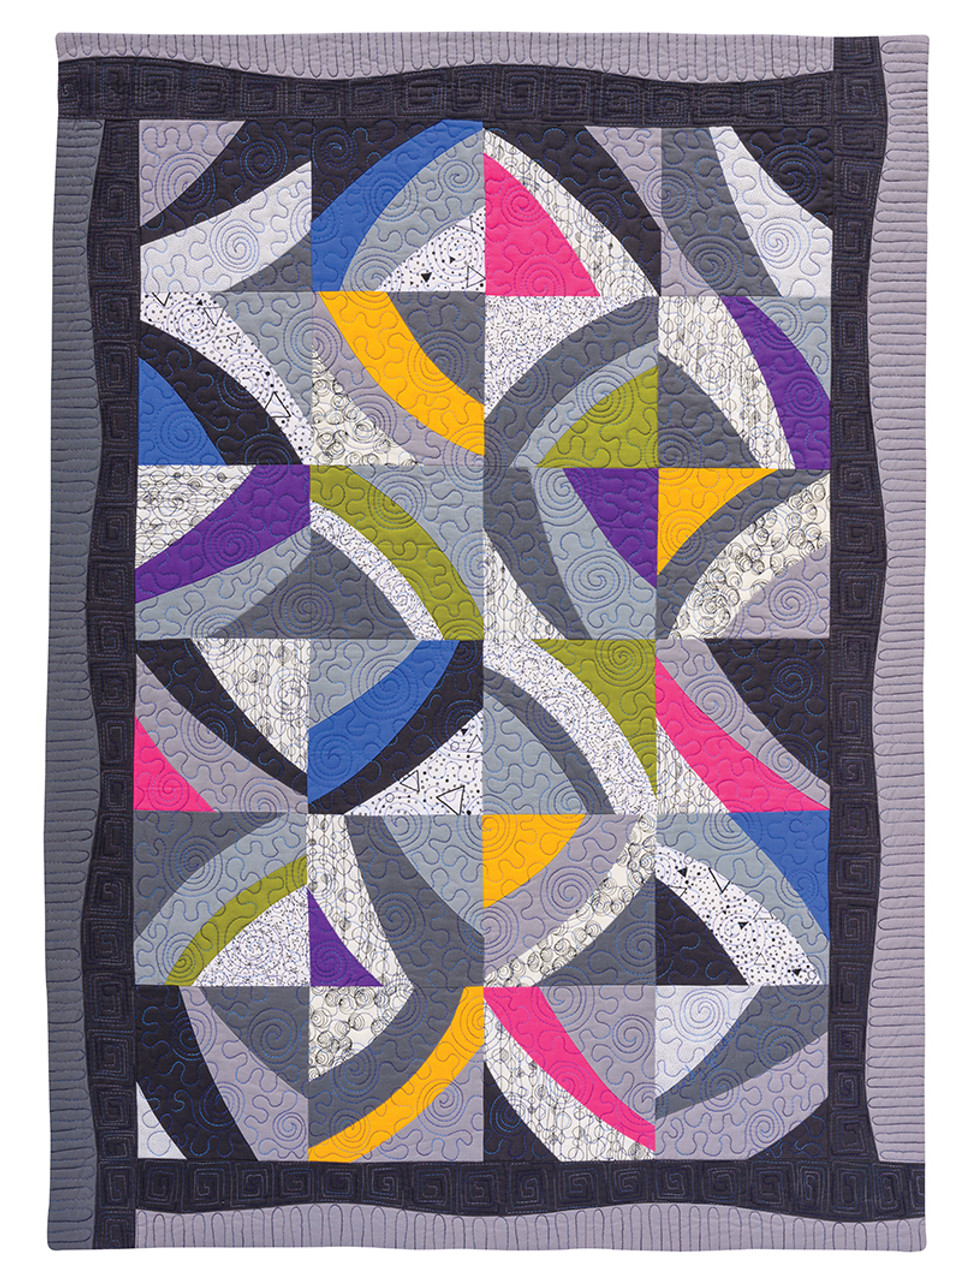 Adventures in Improv Quilts - C&T Publishing